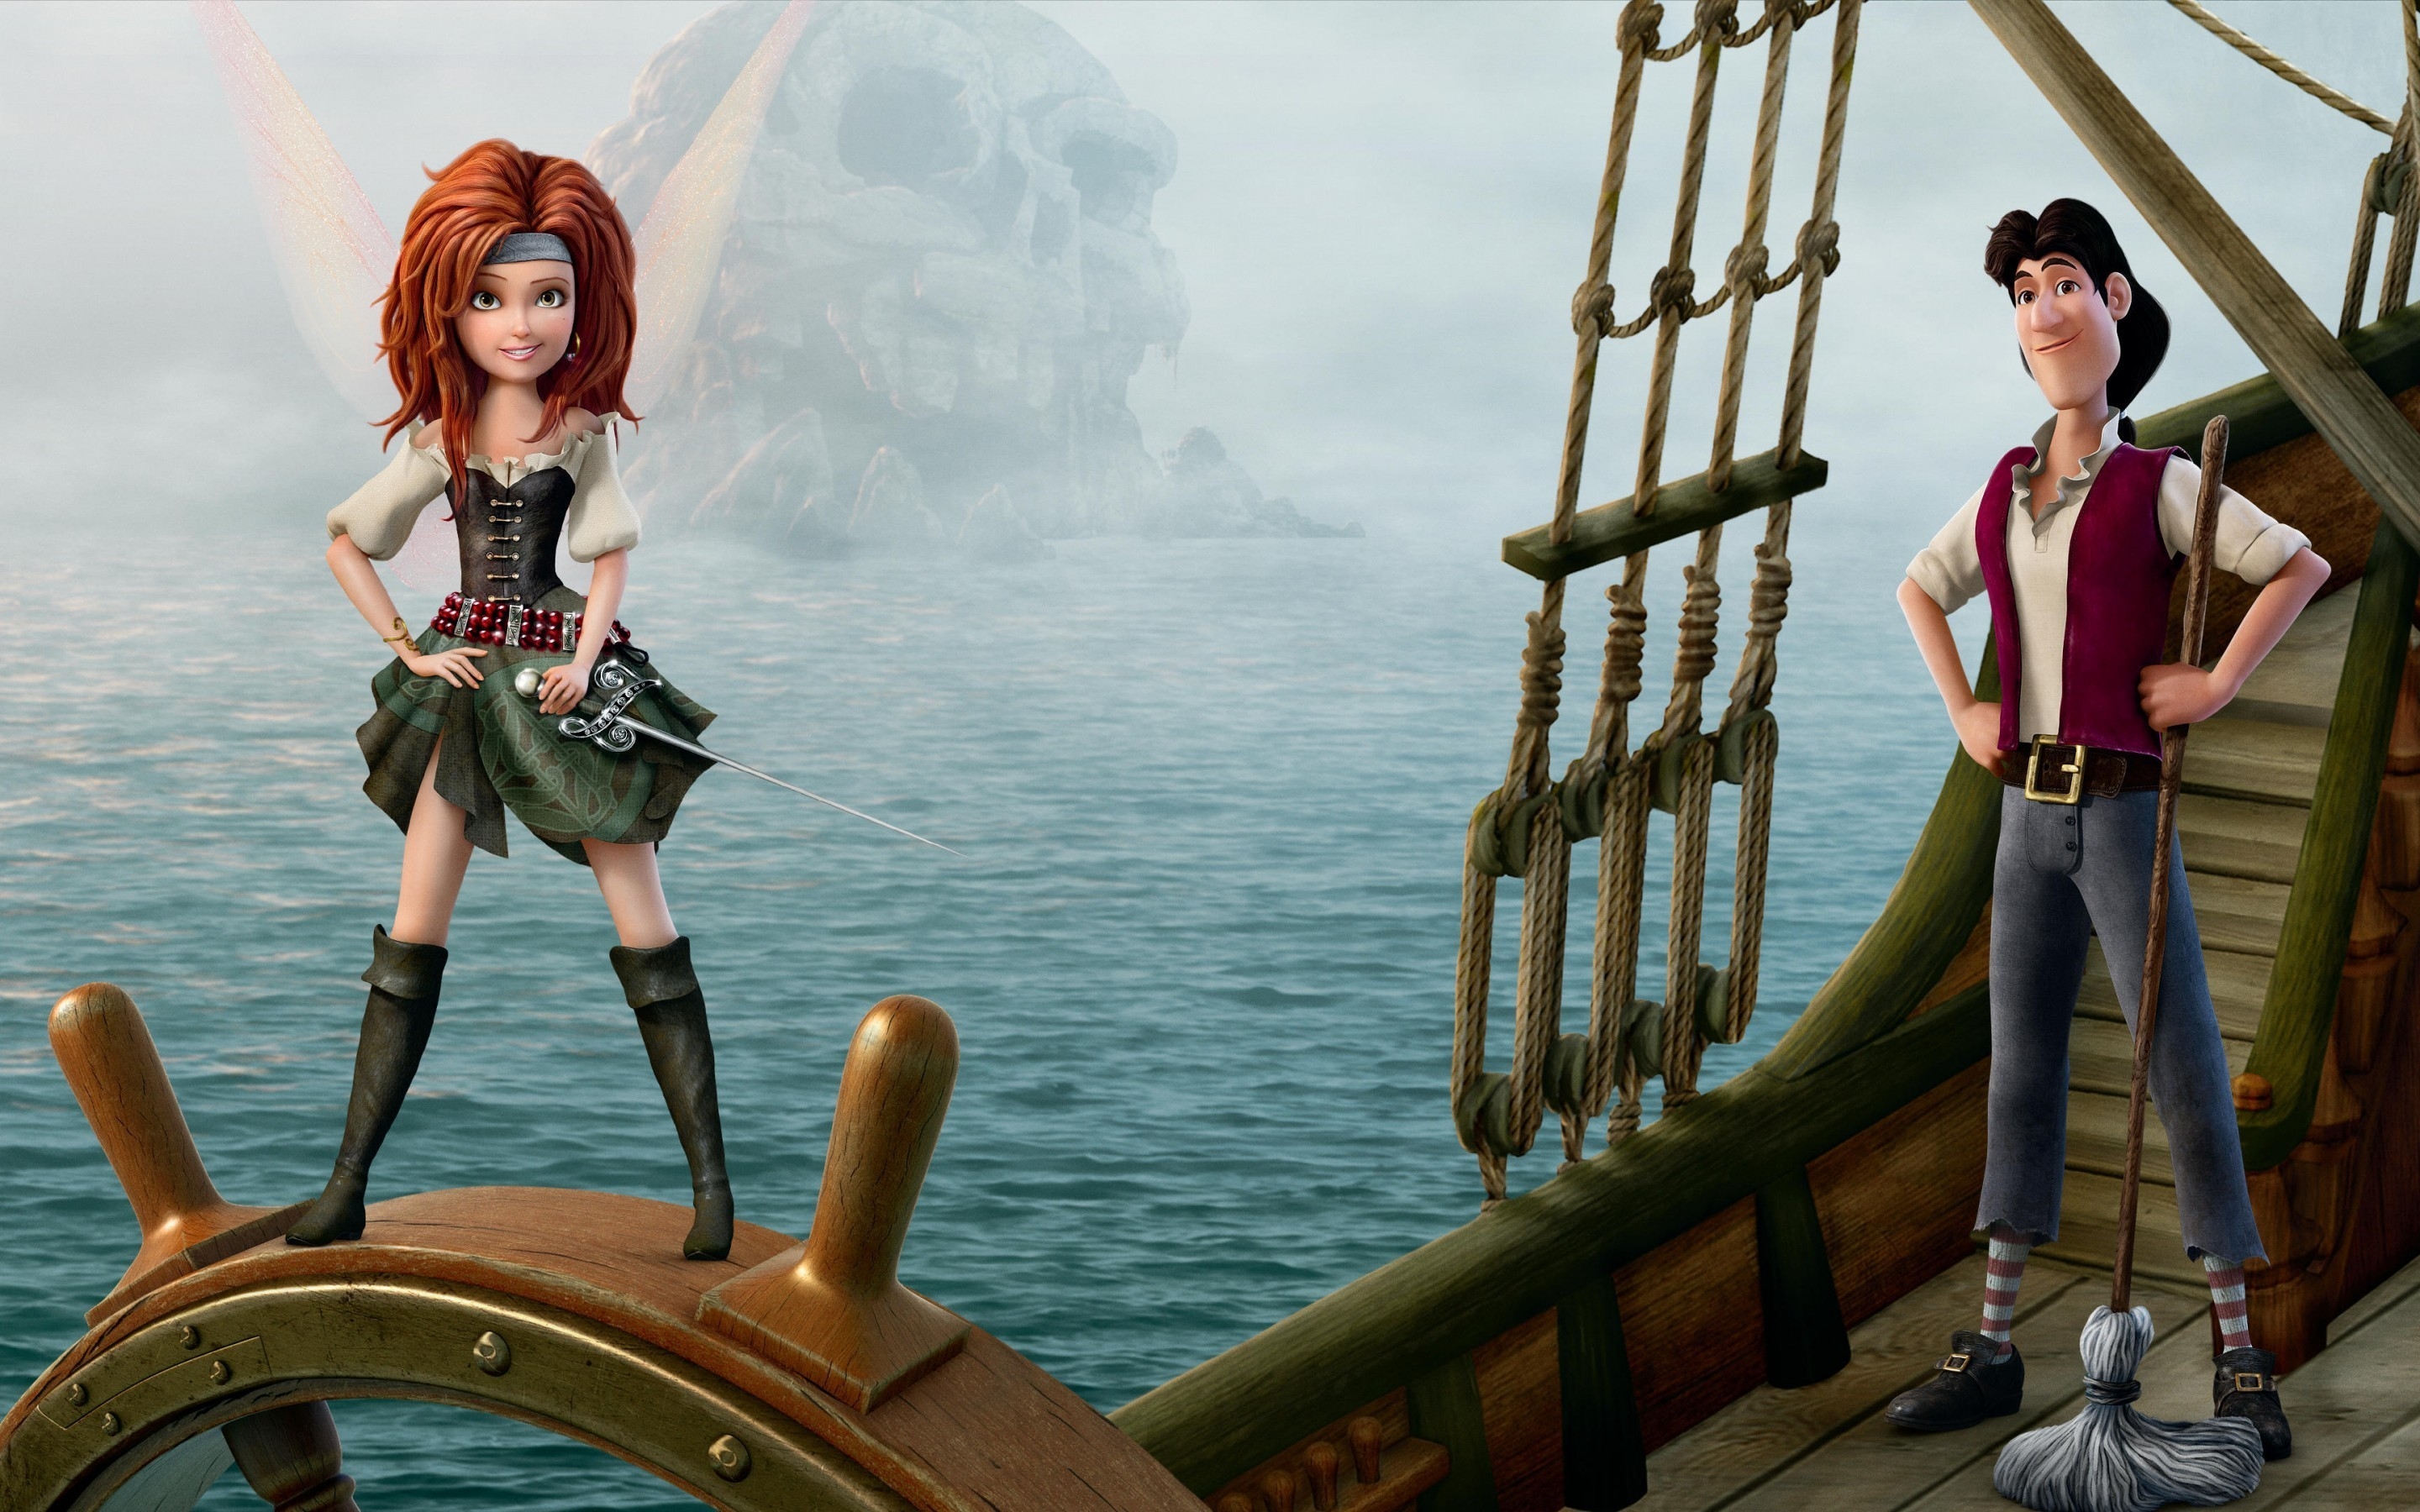 The Pirate Fairy for 2880 x 1800 Retina Display resolution